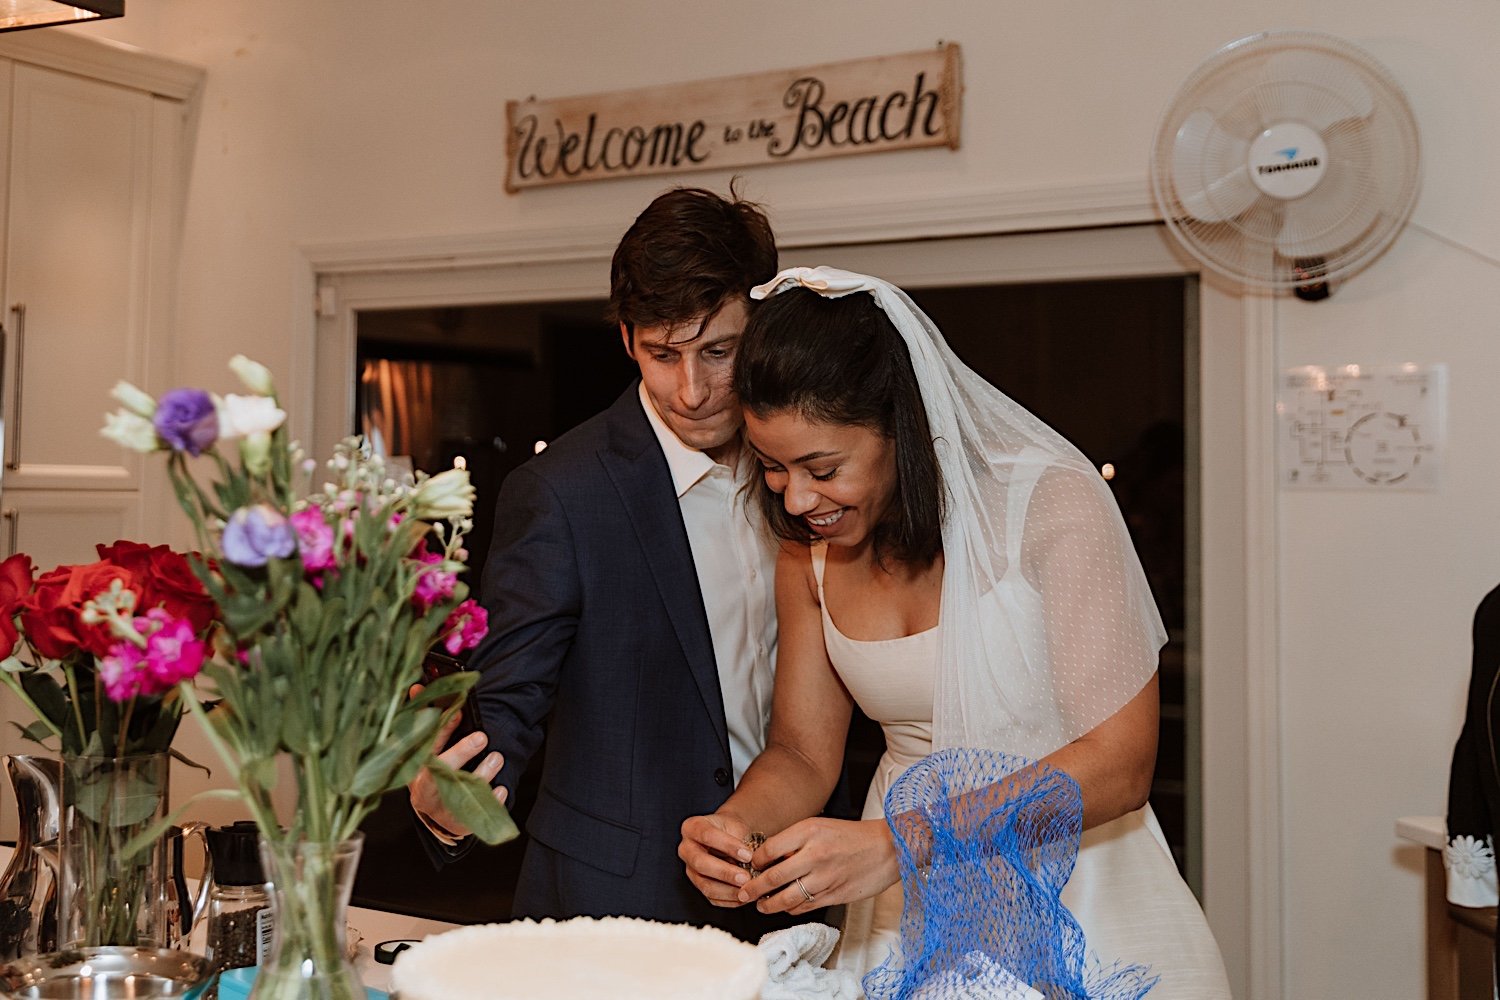 Bride and groom cut cake at intimate Indiana wedding reception